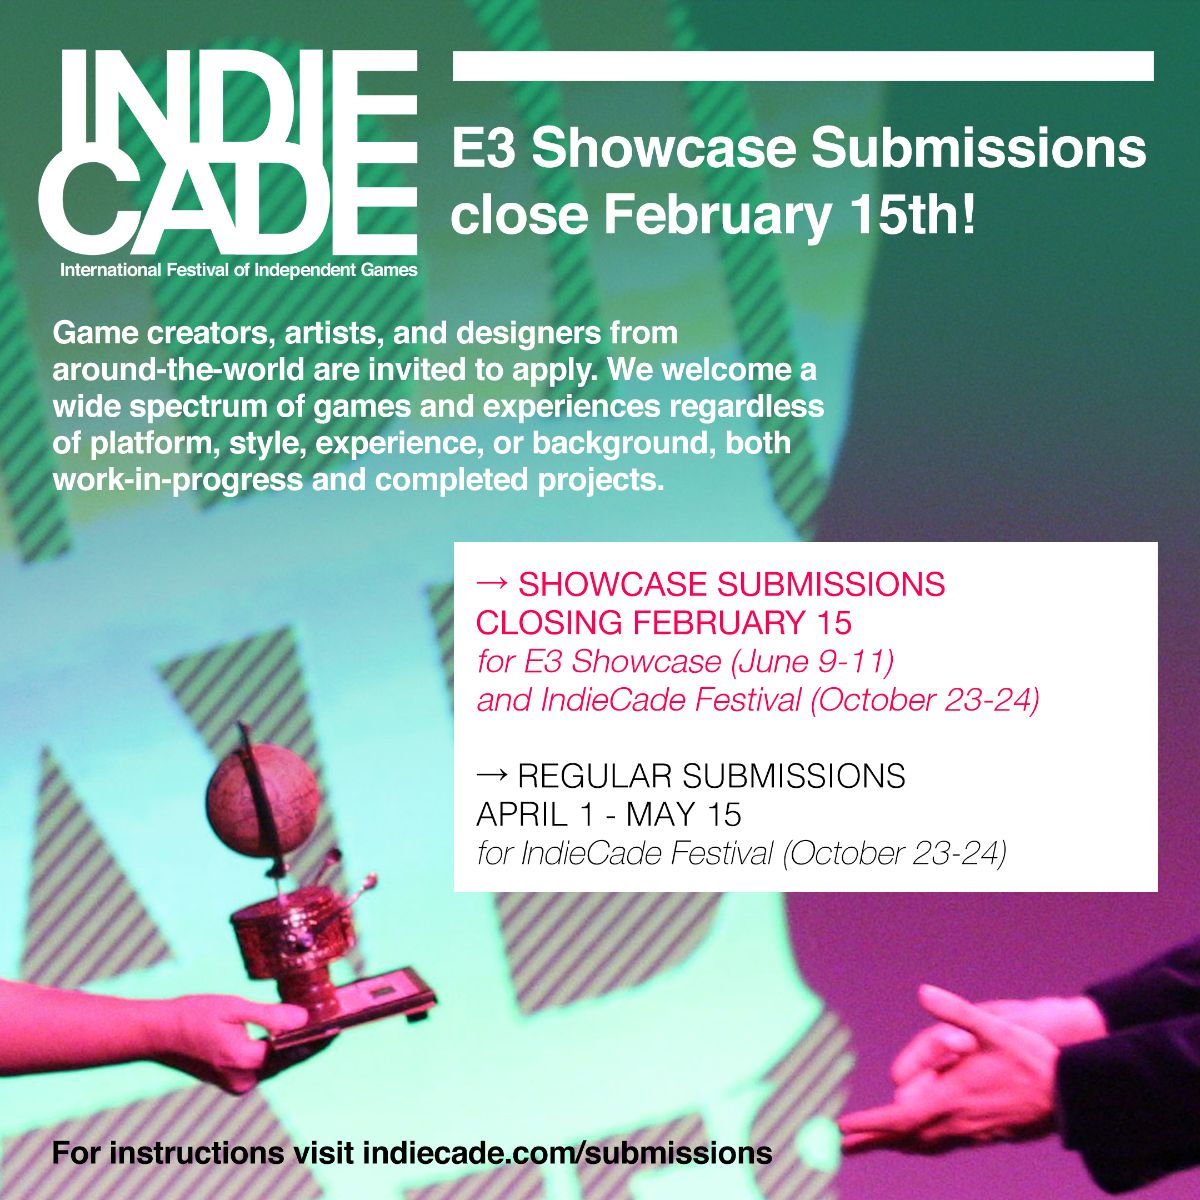 Submissions to IndieCade's E3 2020 Showcase close February 15th. For more instructions please visit https://www.indiecade.com/submissions